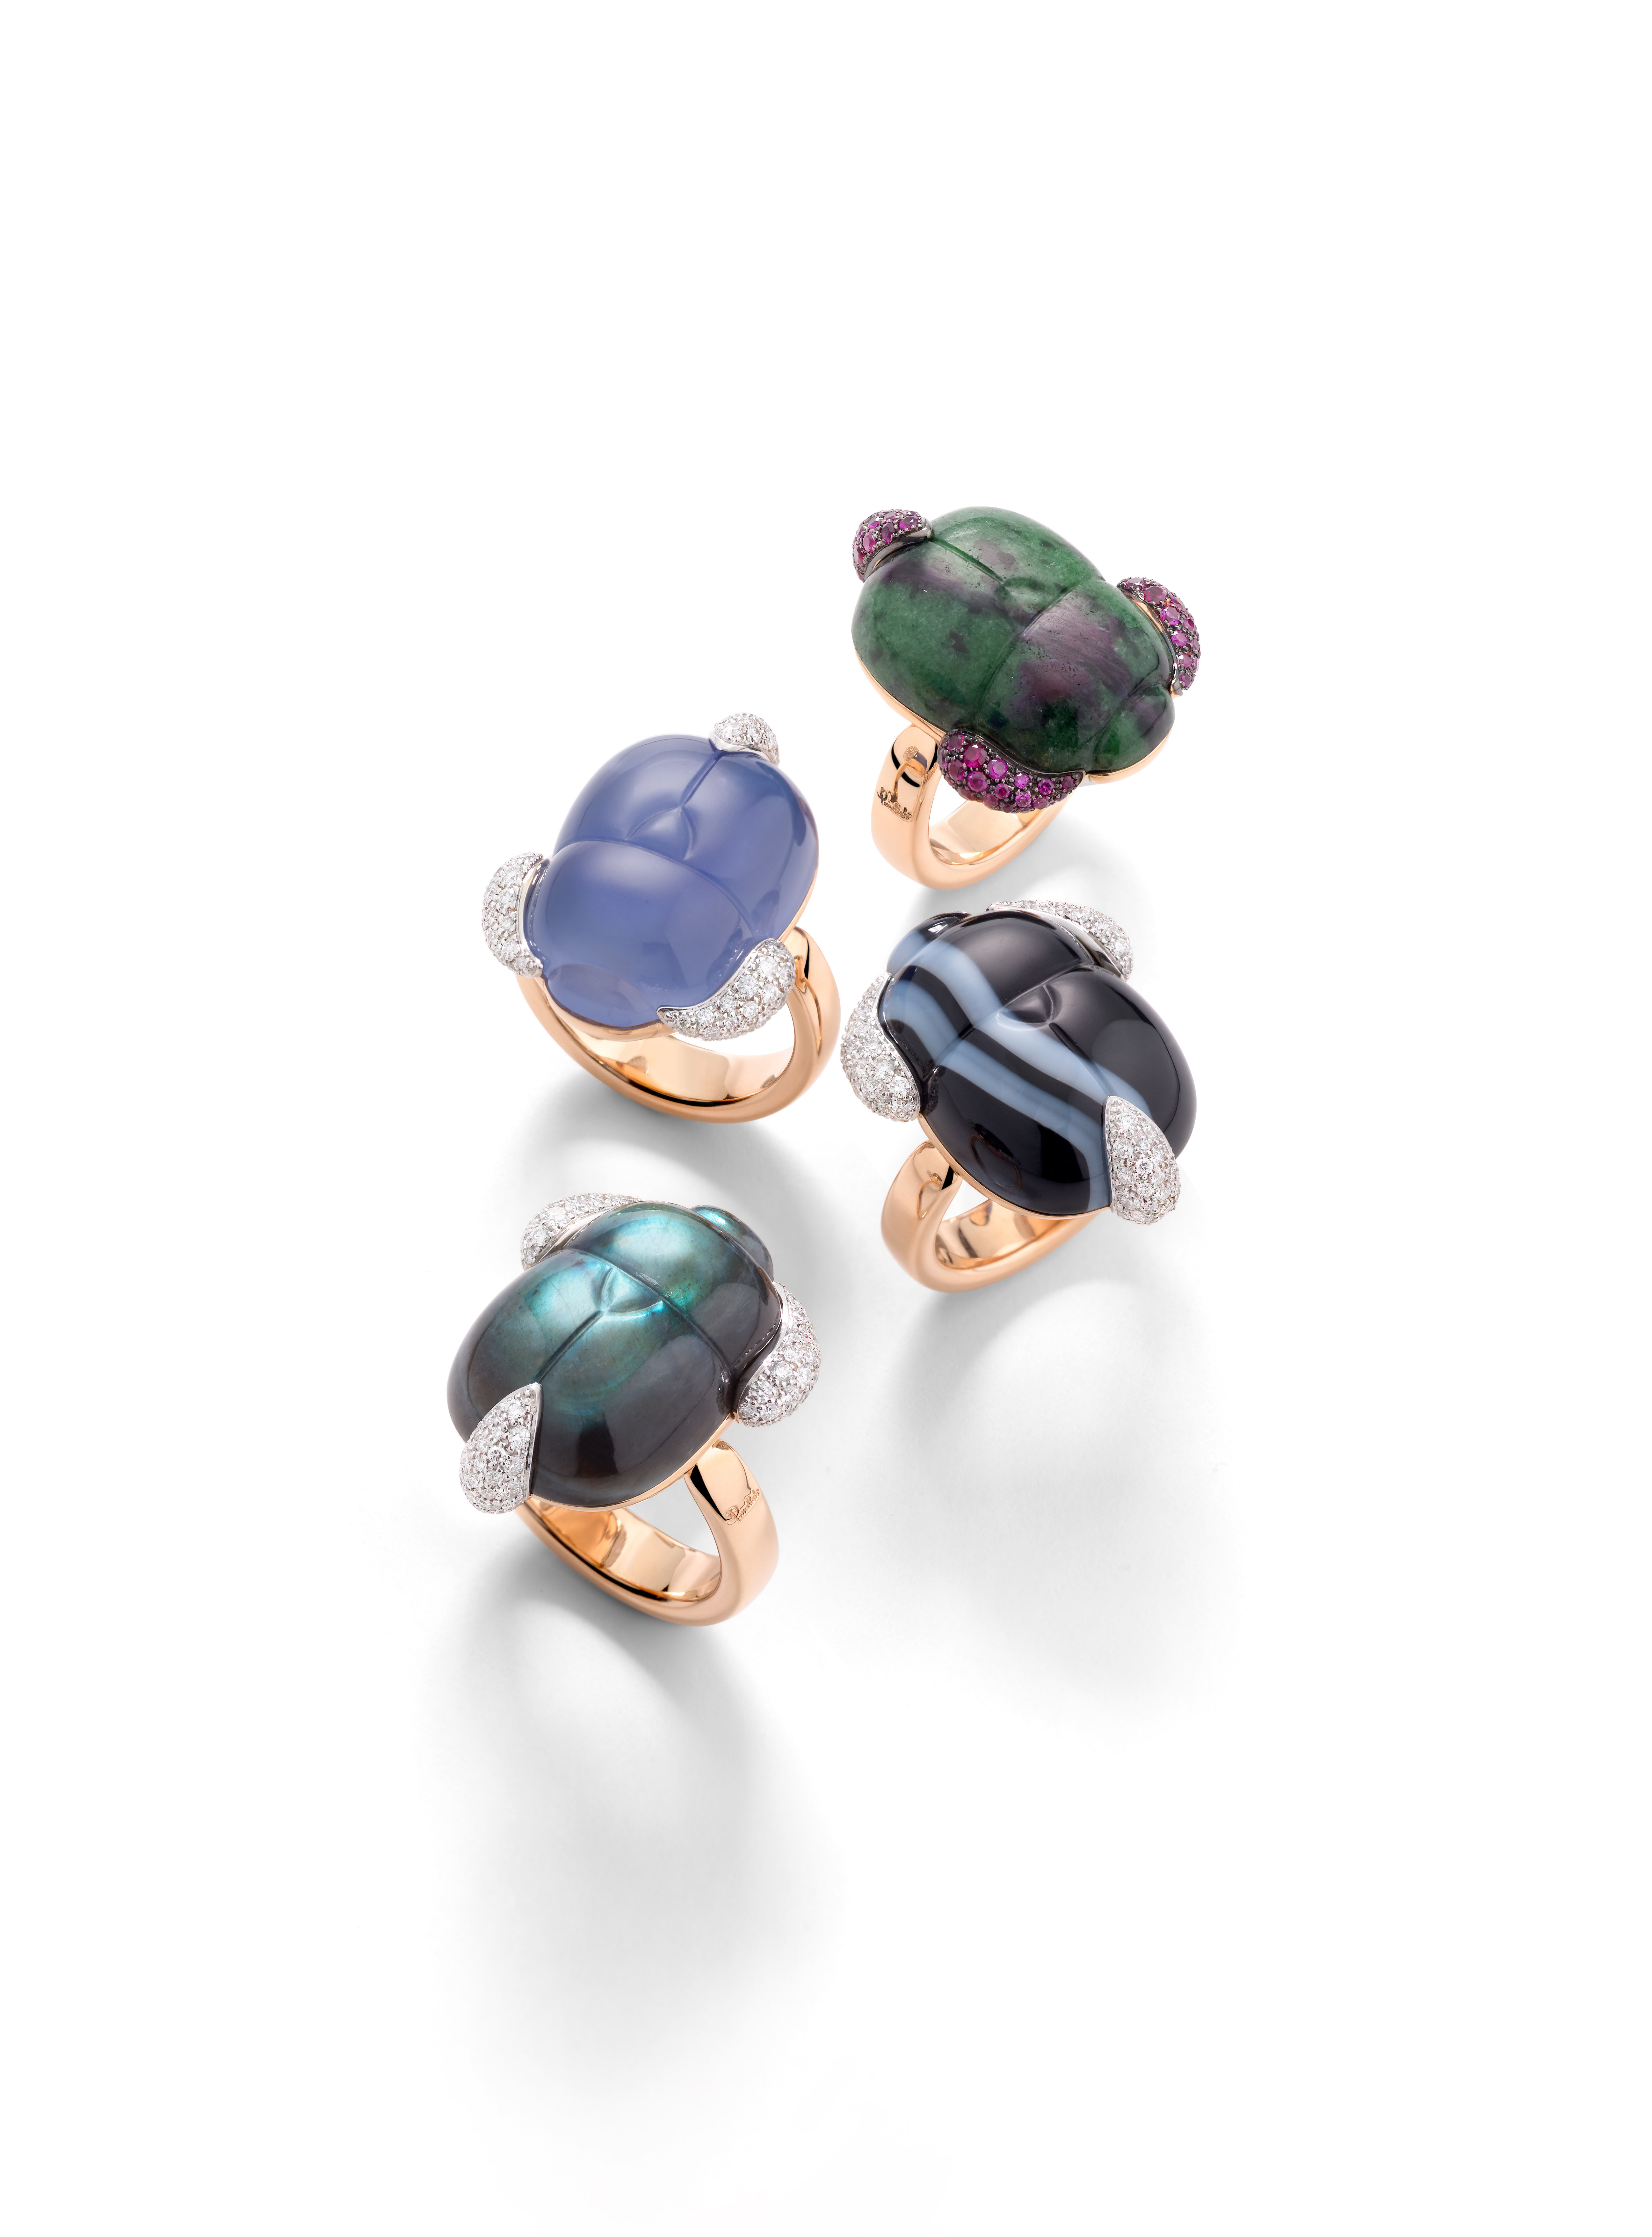 A group of rings with gemstones

Description automatically generated